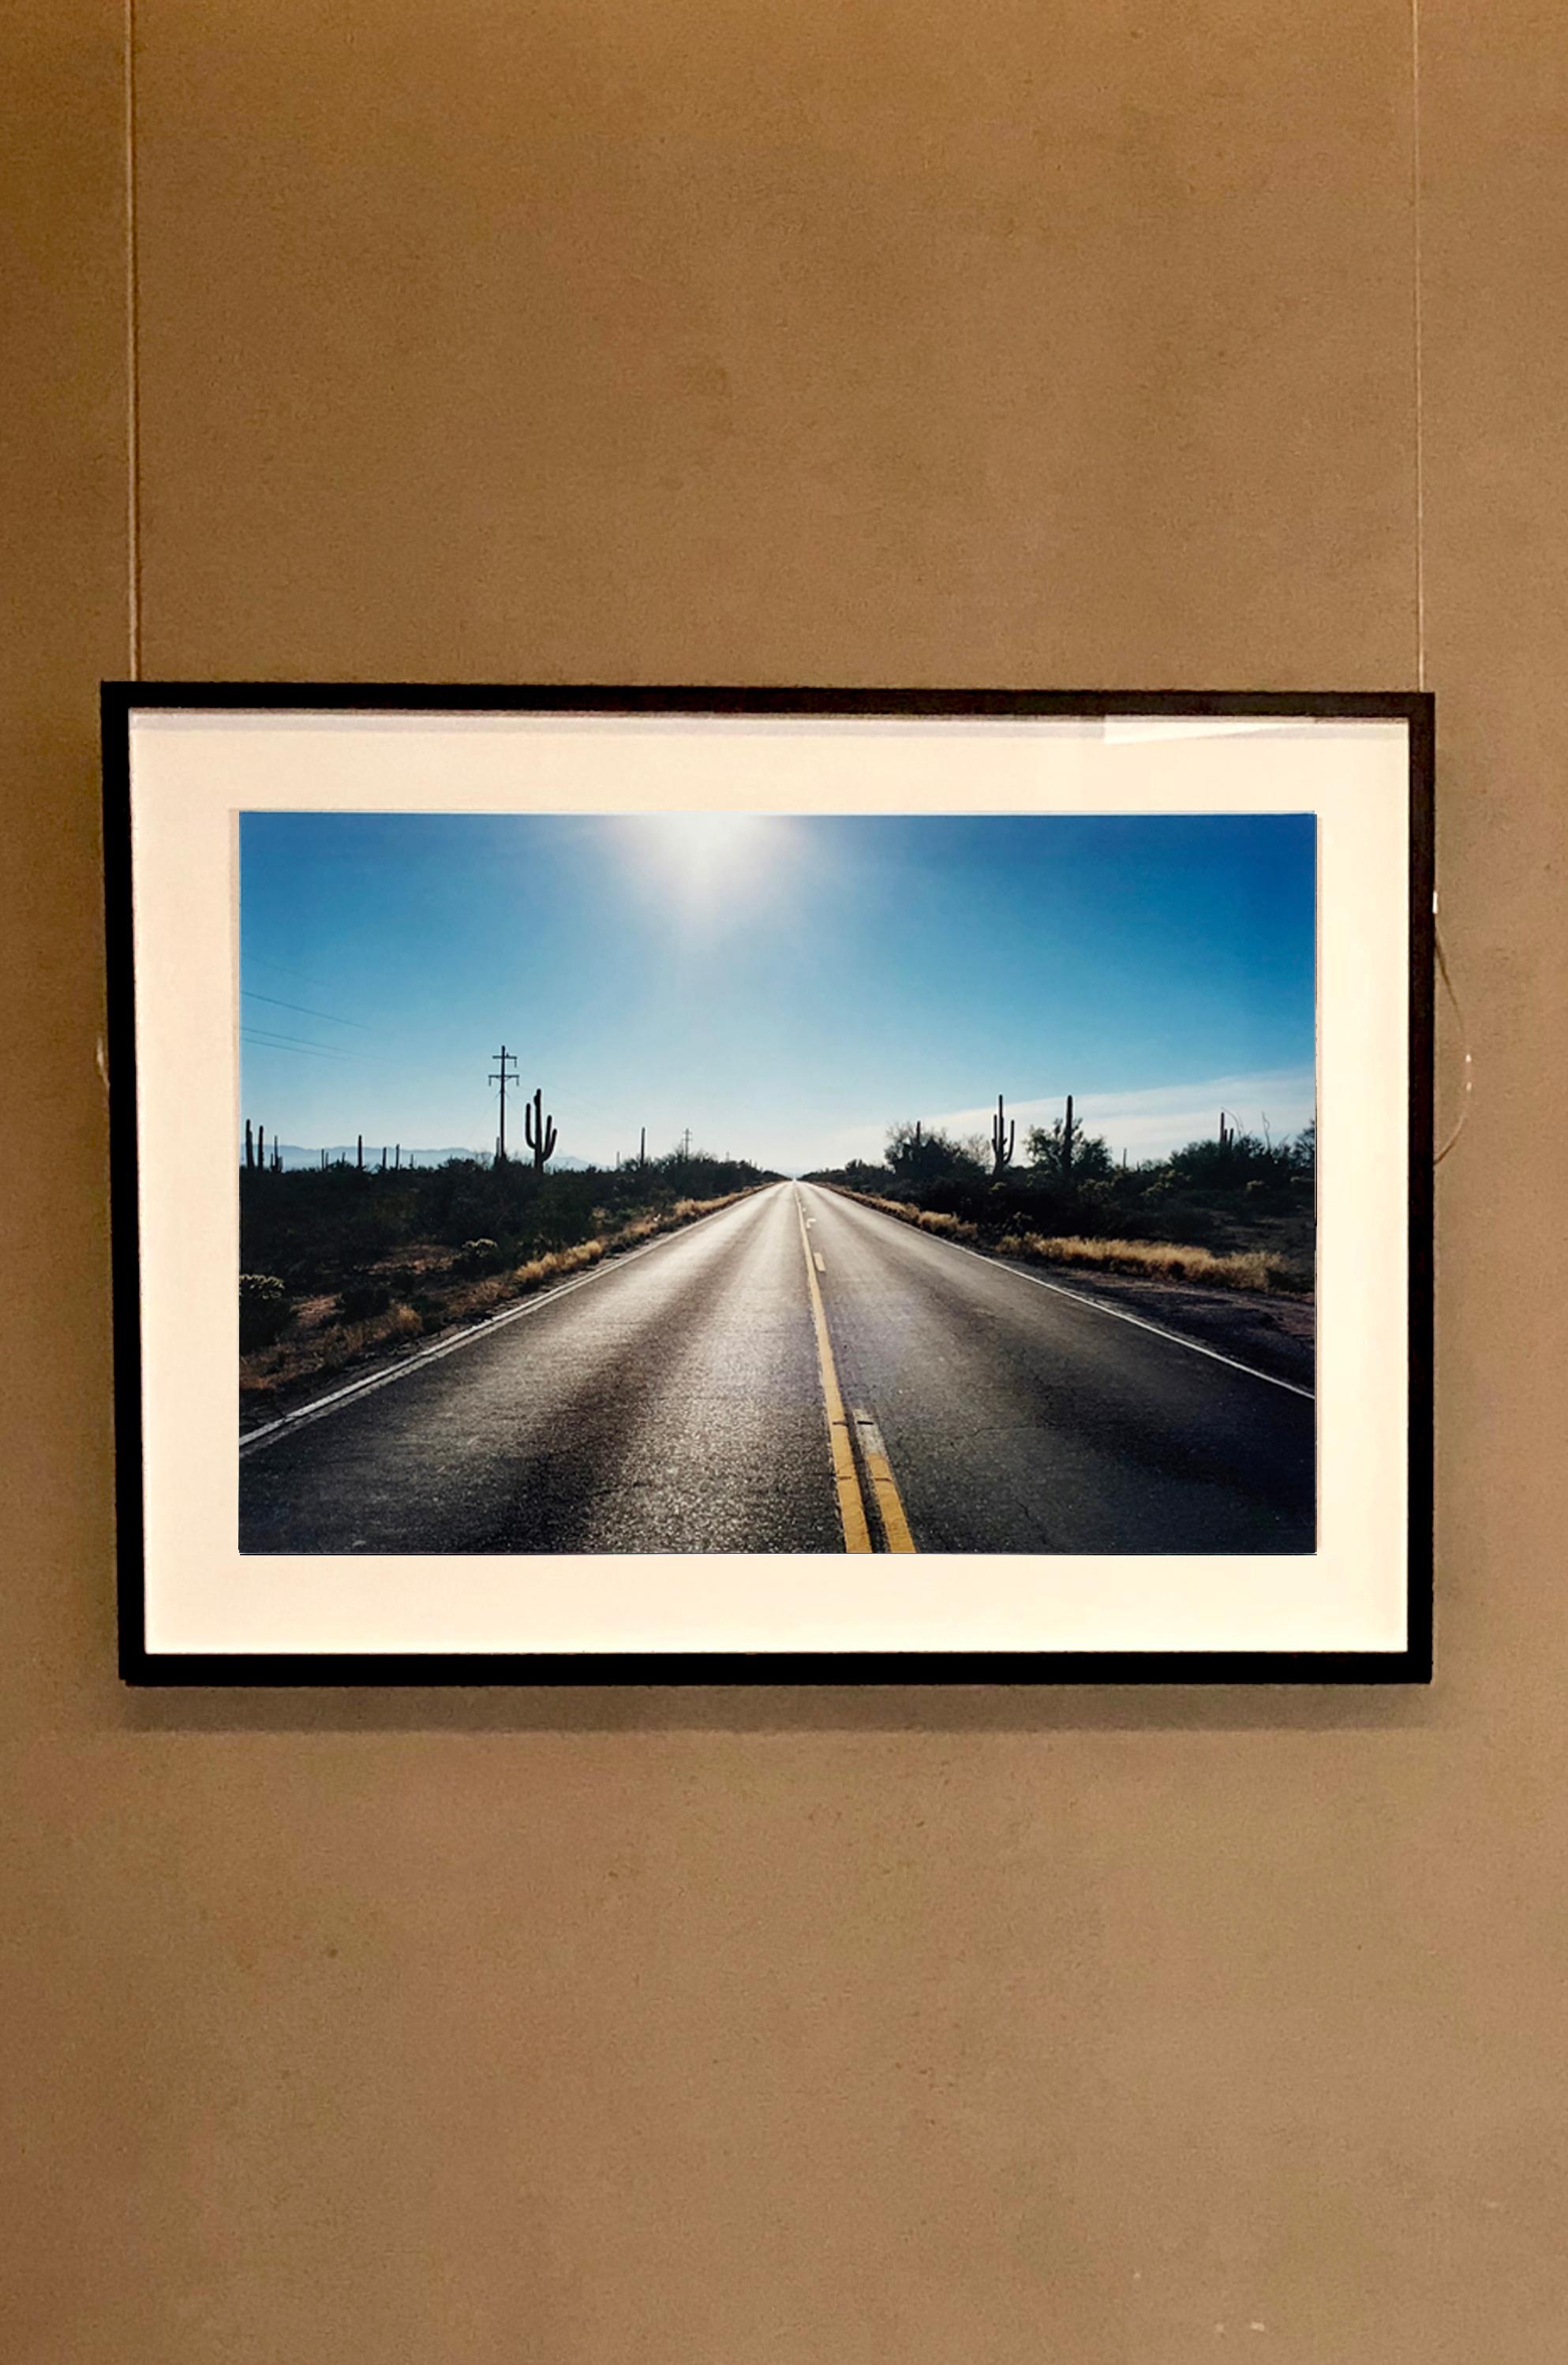 Part of Richard Heeps 'Dream in Colour' Series, this is the classic American open road photograph, which is a metaphor throughout Richard's work. The early morning sunlight and the road combine to create this iconic piece.

This artwork is a limited